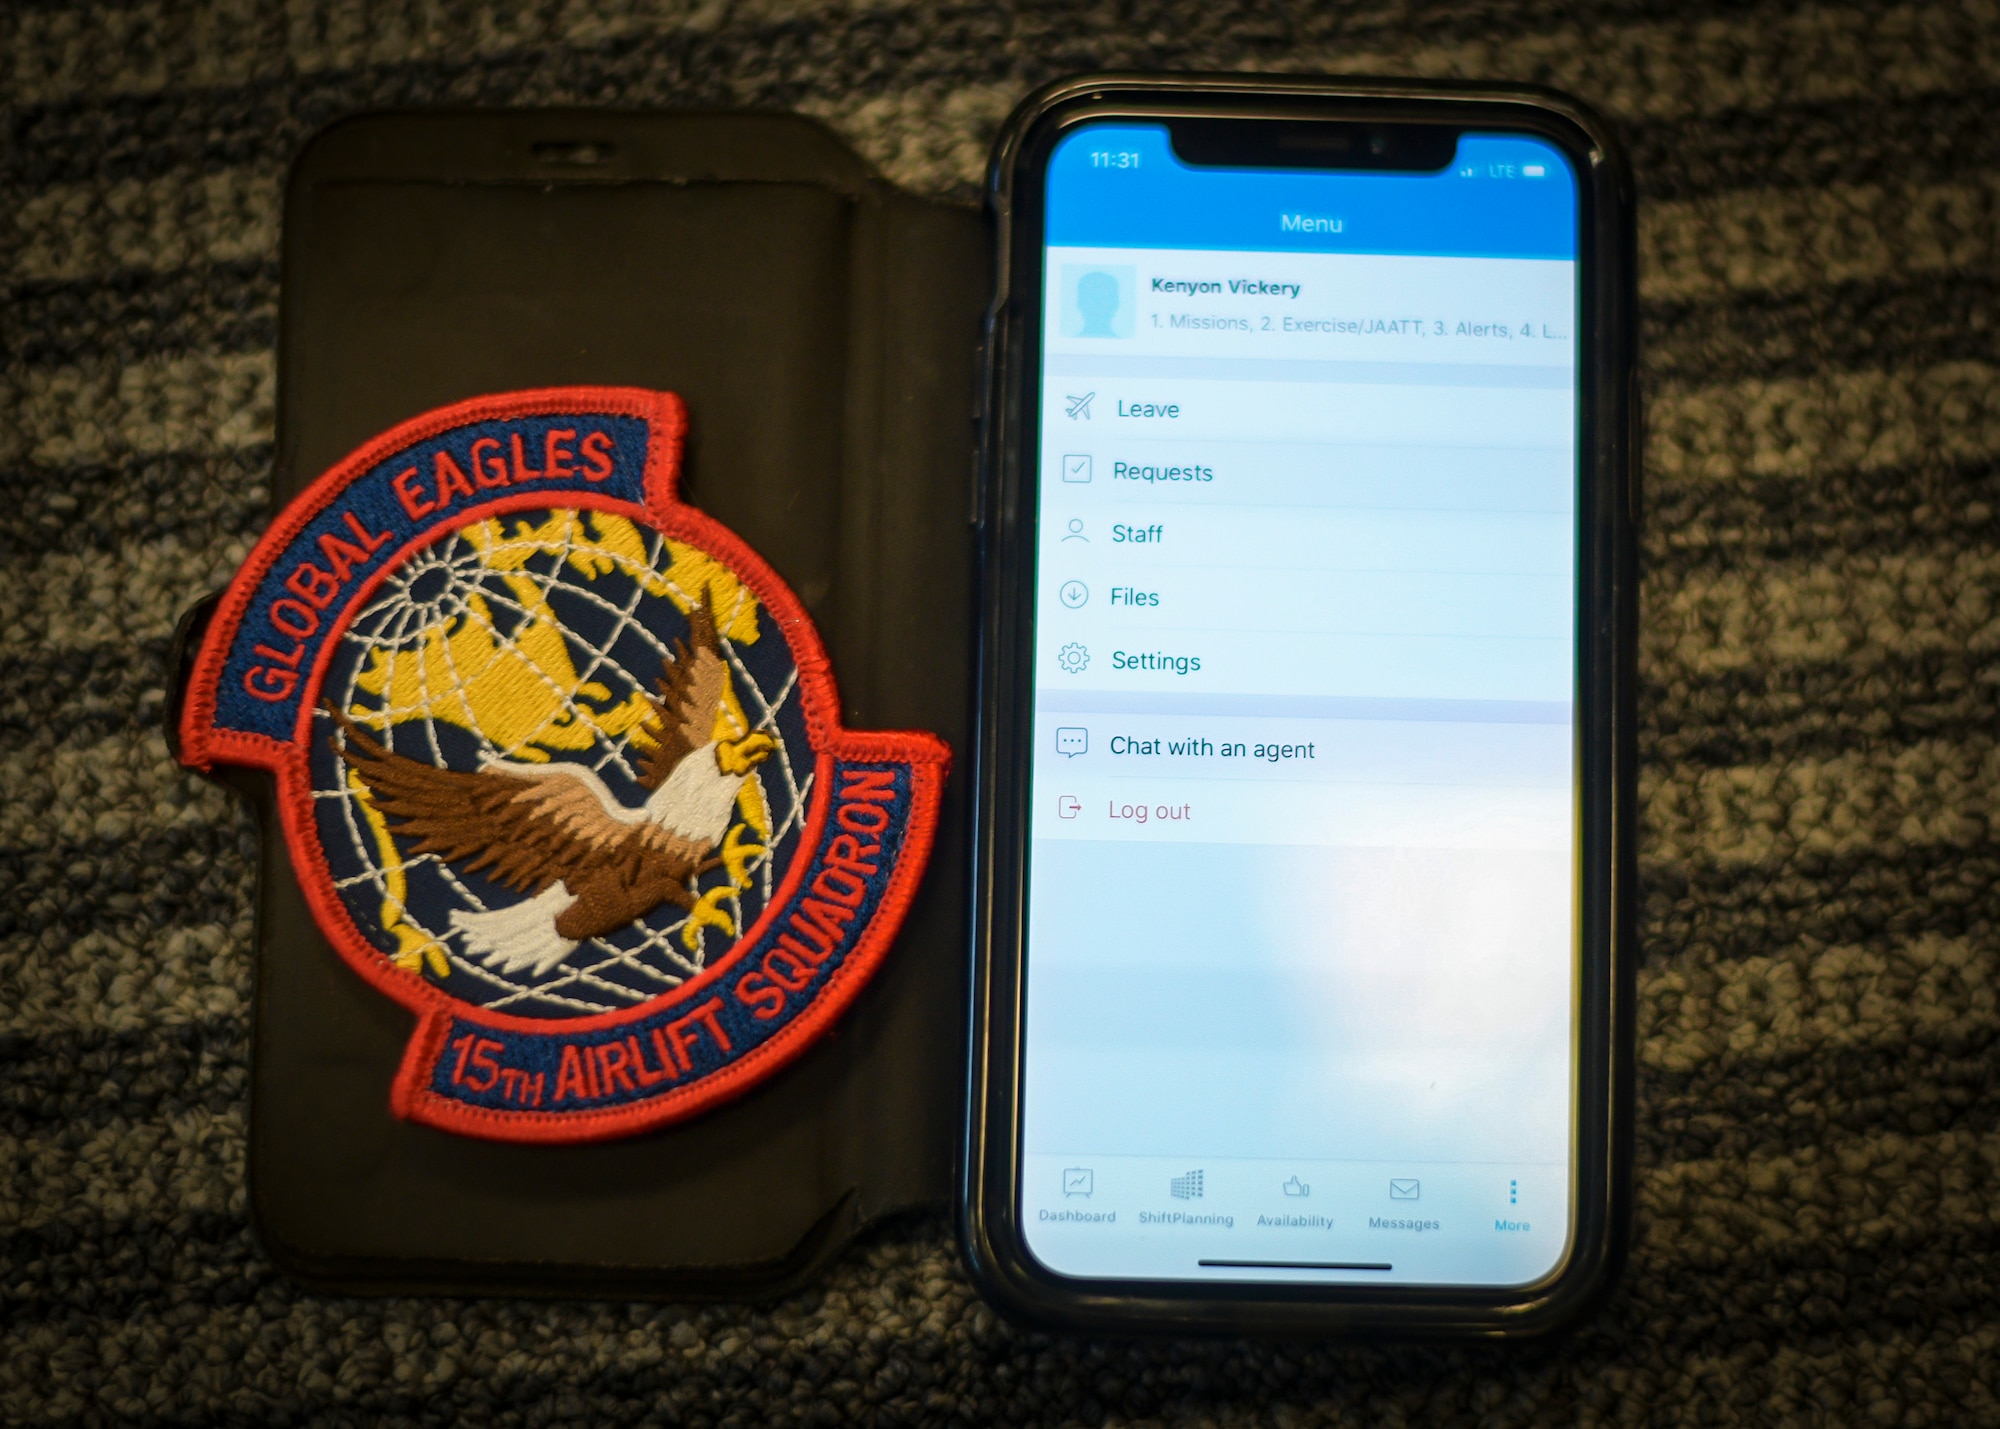 A 15th Airlift Squadron patch next to a smartphone with the squadrons scheduling application interface Nov. 30, 2018, at Joint Base Charleston, S.C. The 15th AS decided to employ an innovative and efficient way of relaying scheduling information to the flyers via a smartphone application.